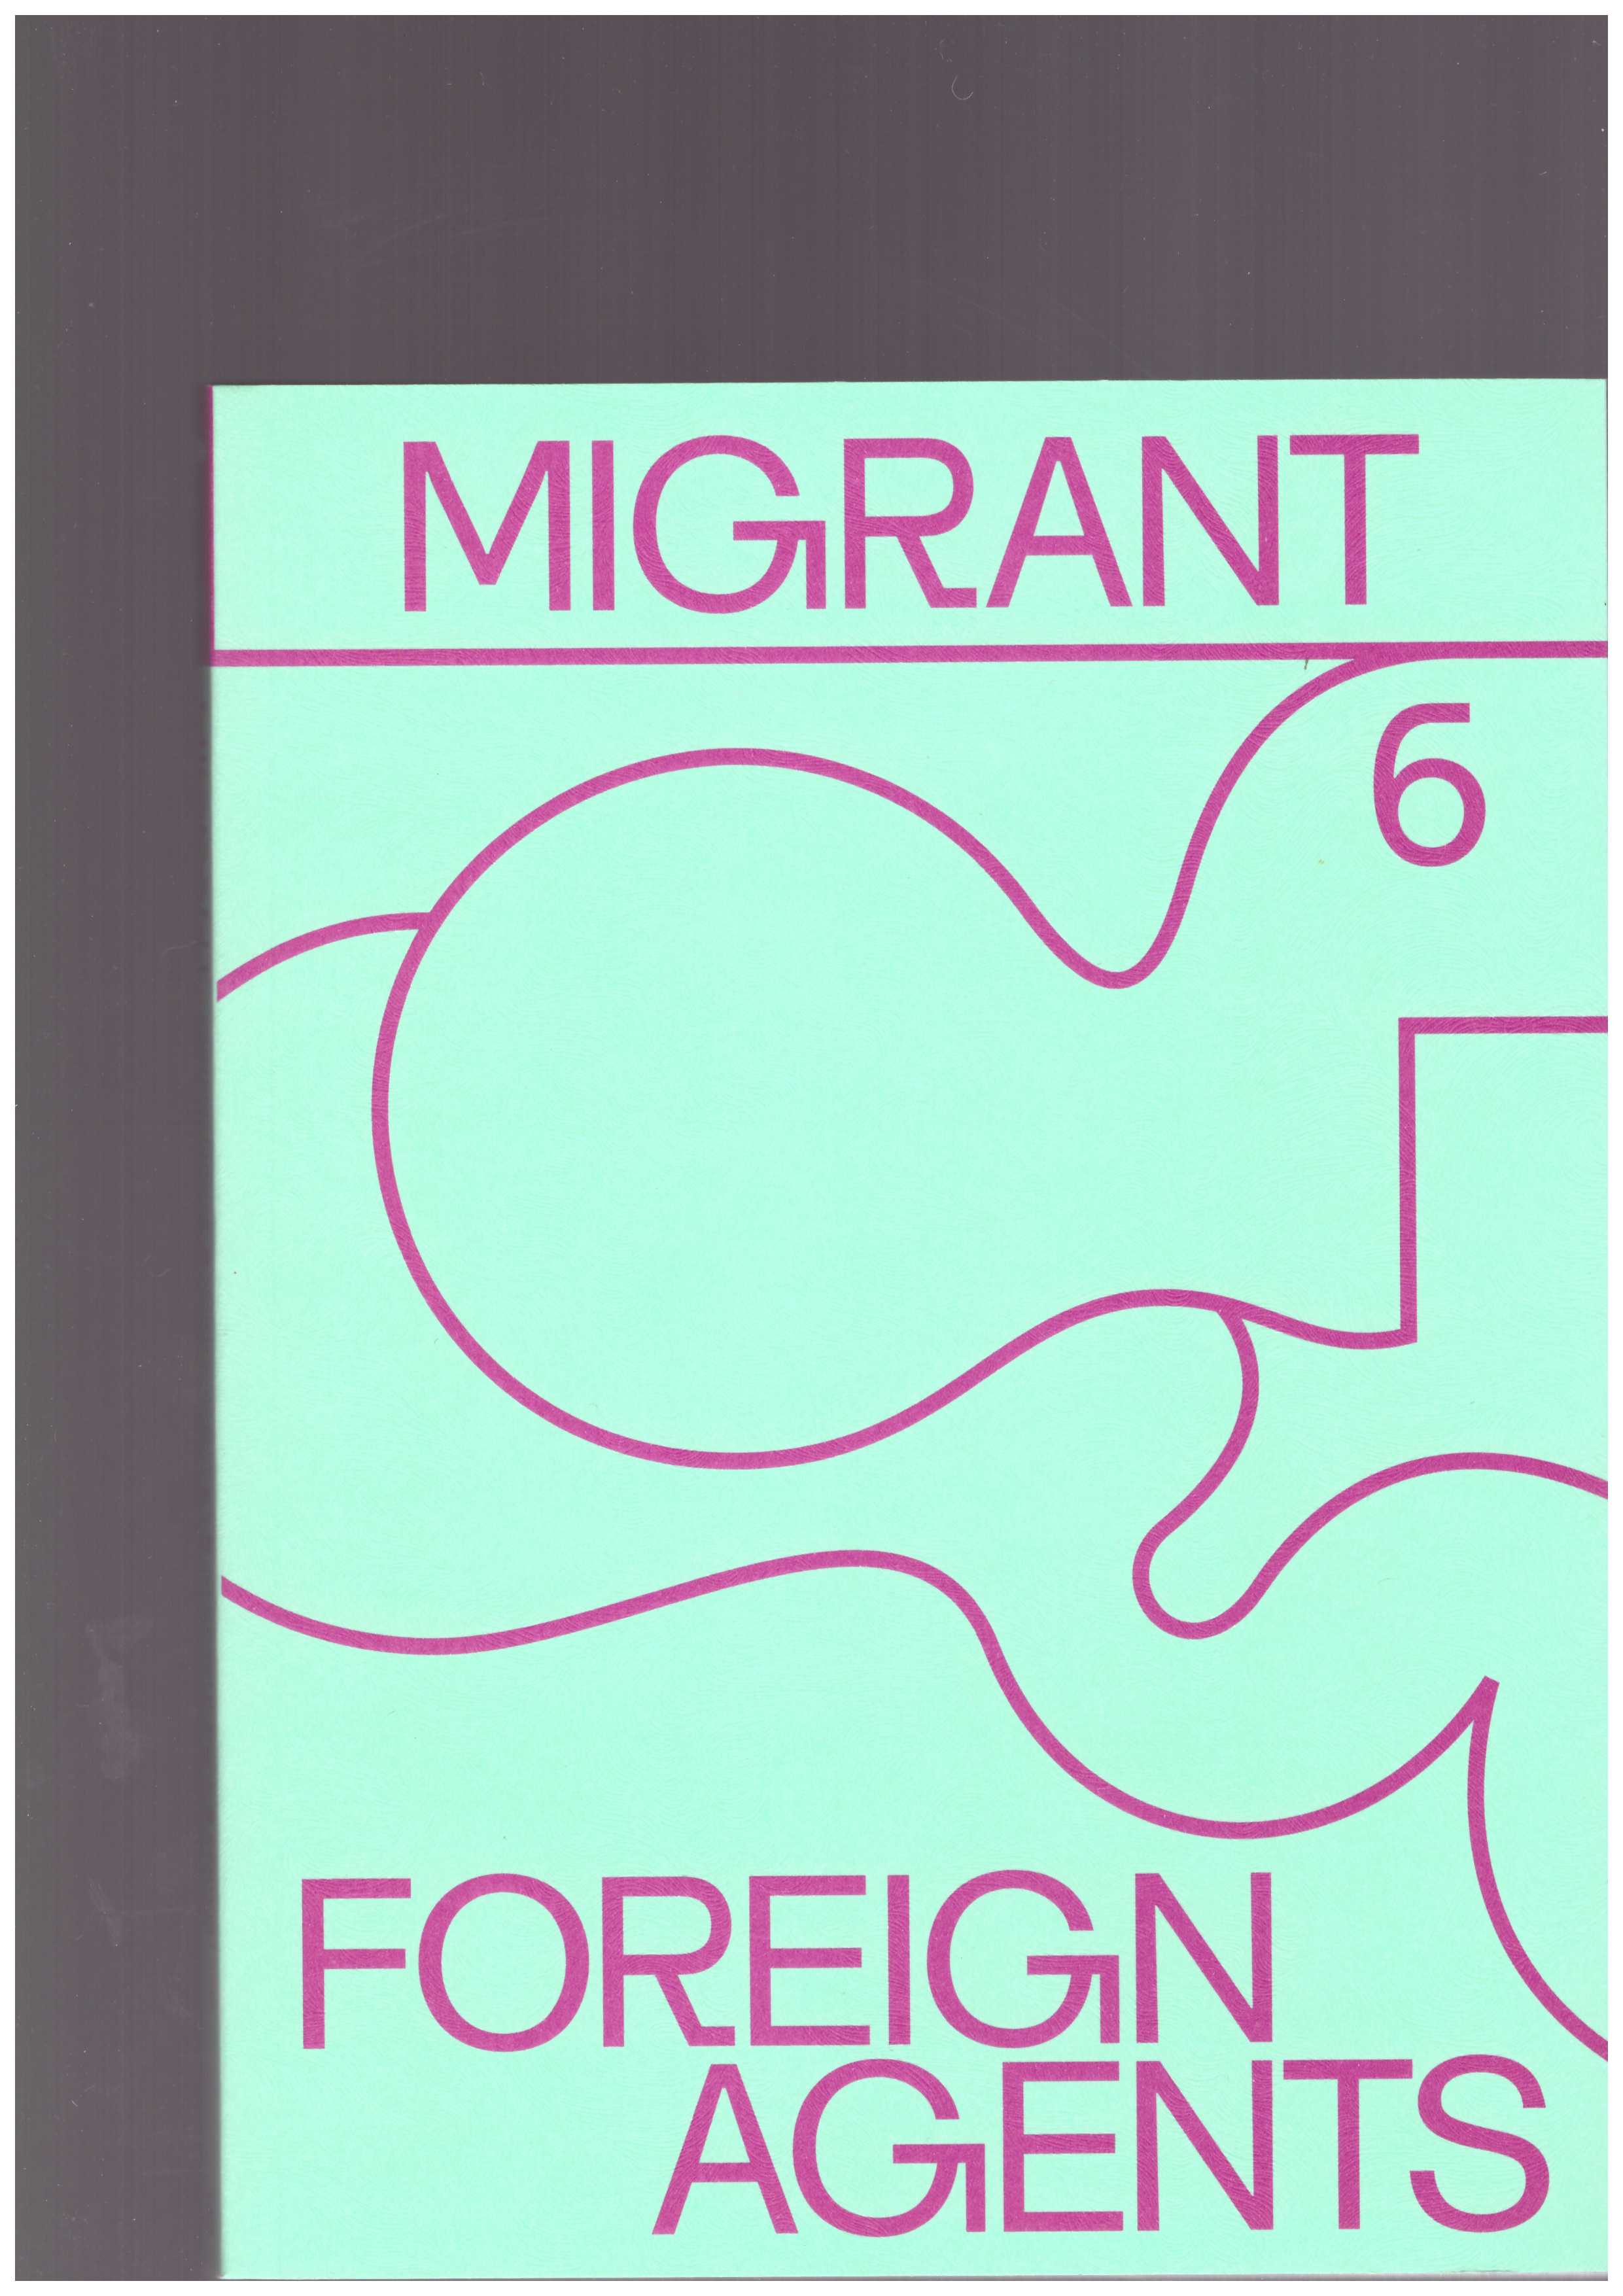 TRIBILLION, Justinien ; BUSSE, Michaela ; RANDULFE, Dámaso (eds.) - Migrant Journal issue 6: FOREIGN AGENTS